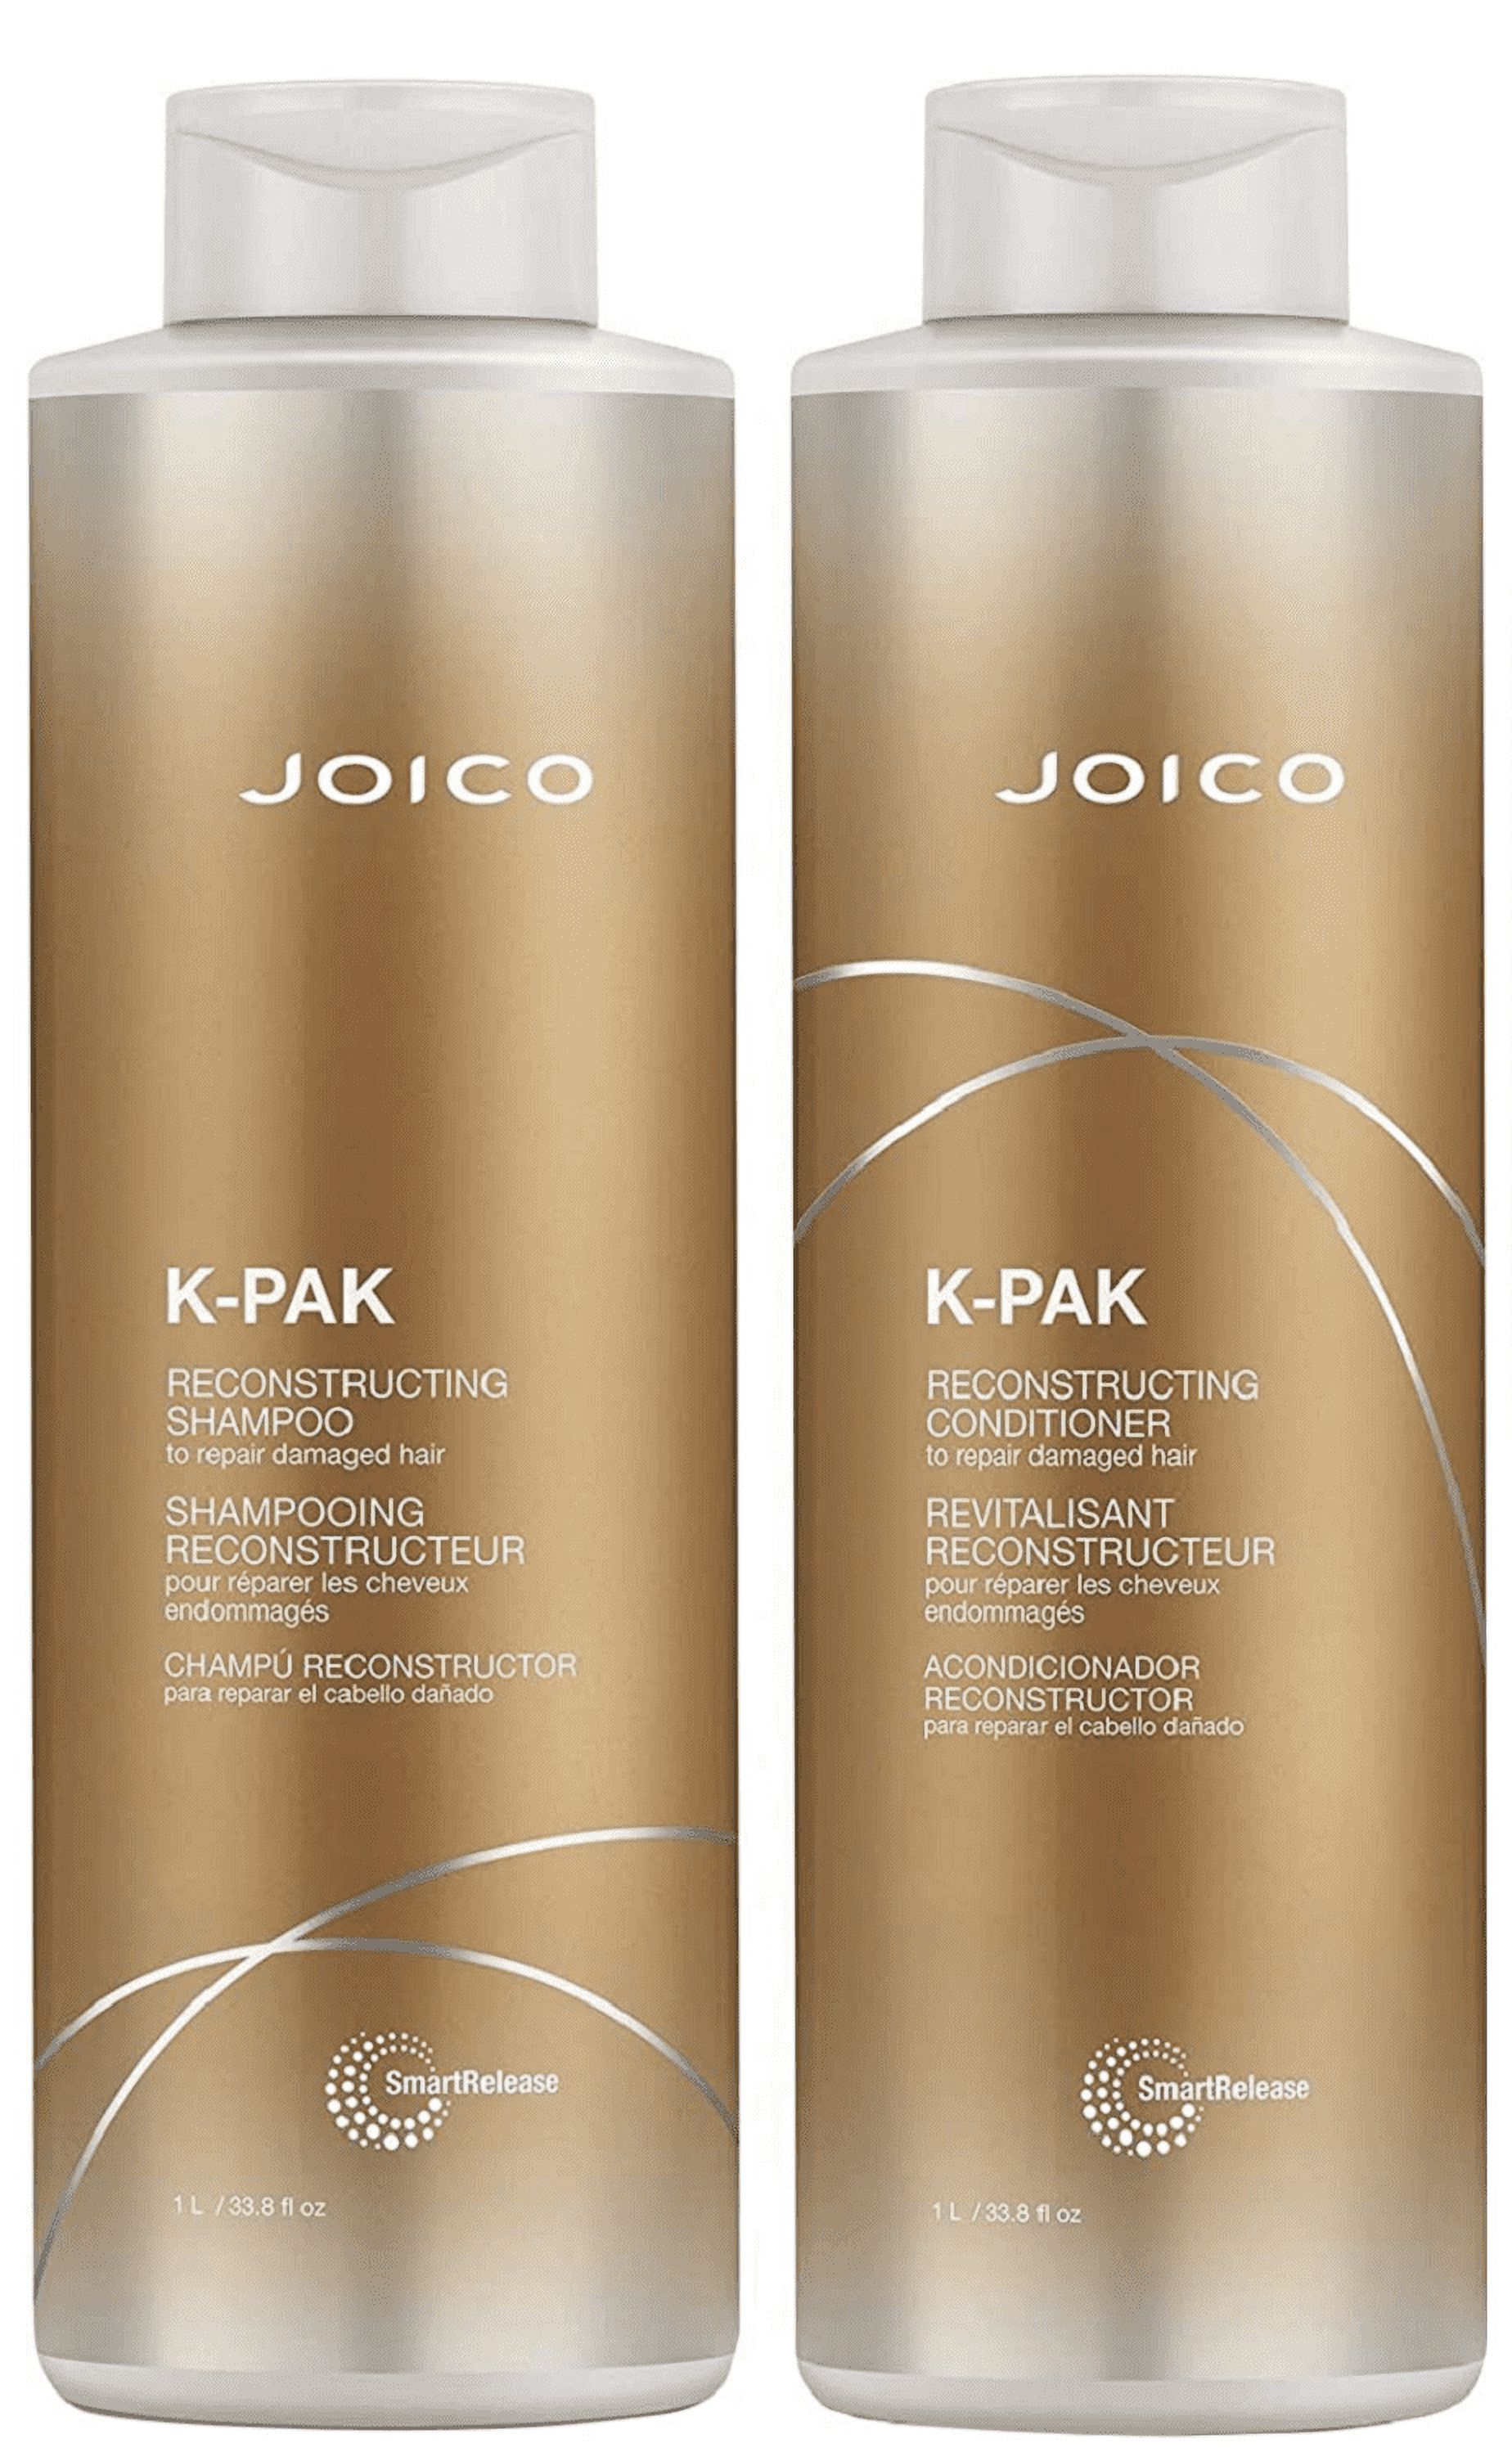 Joico K-PAK Shampoo And Conditioner Damaged Hair\'s Hero Shampoo & Conditioner Duo 33.8 Ounce Each - image 1 of 3